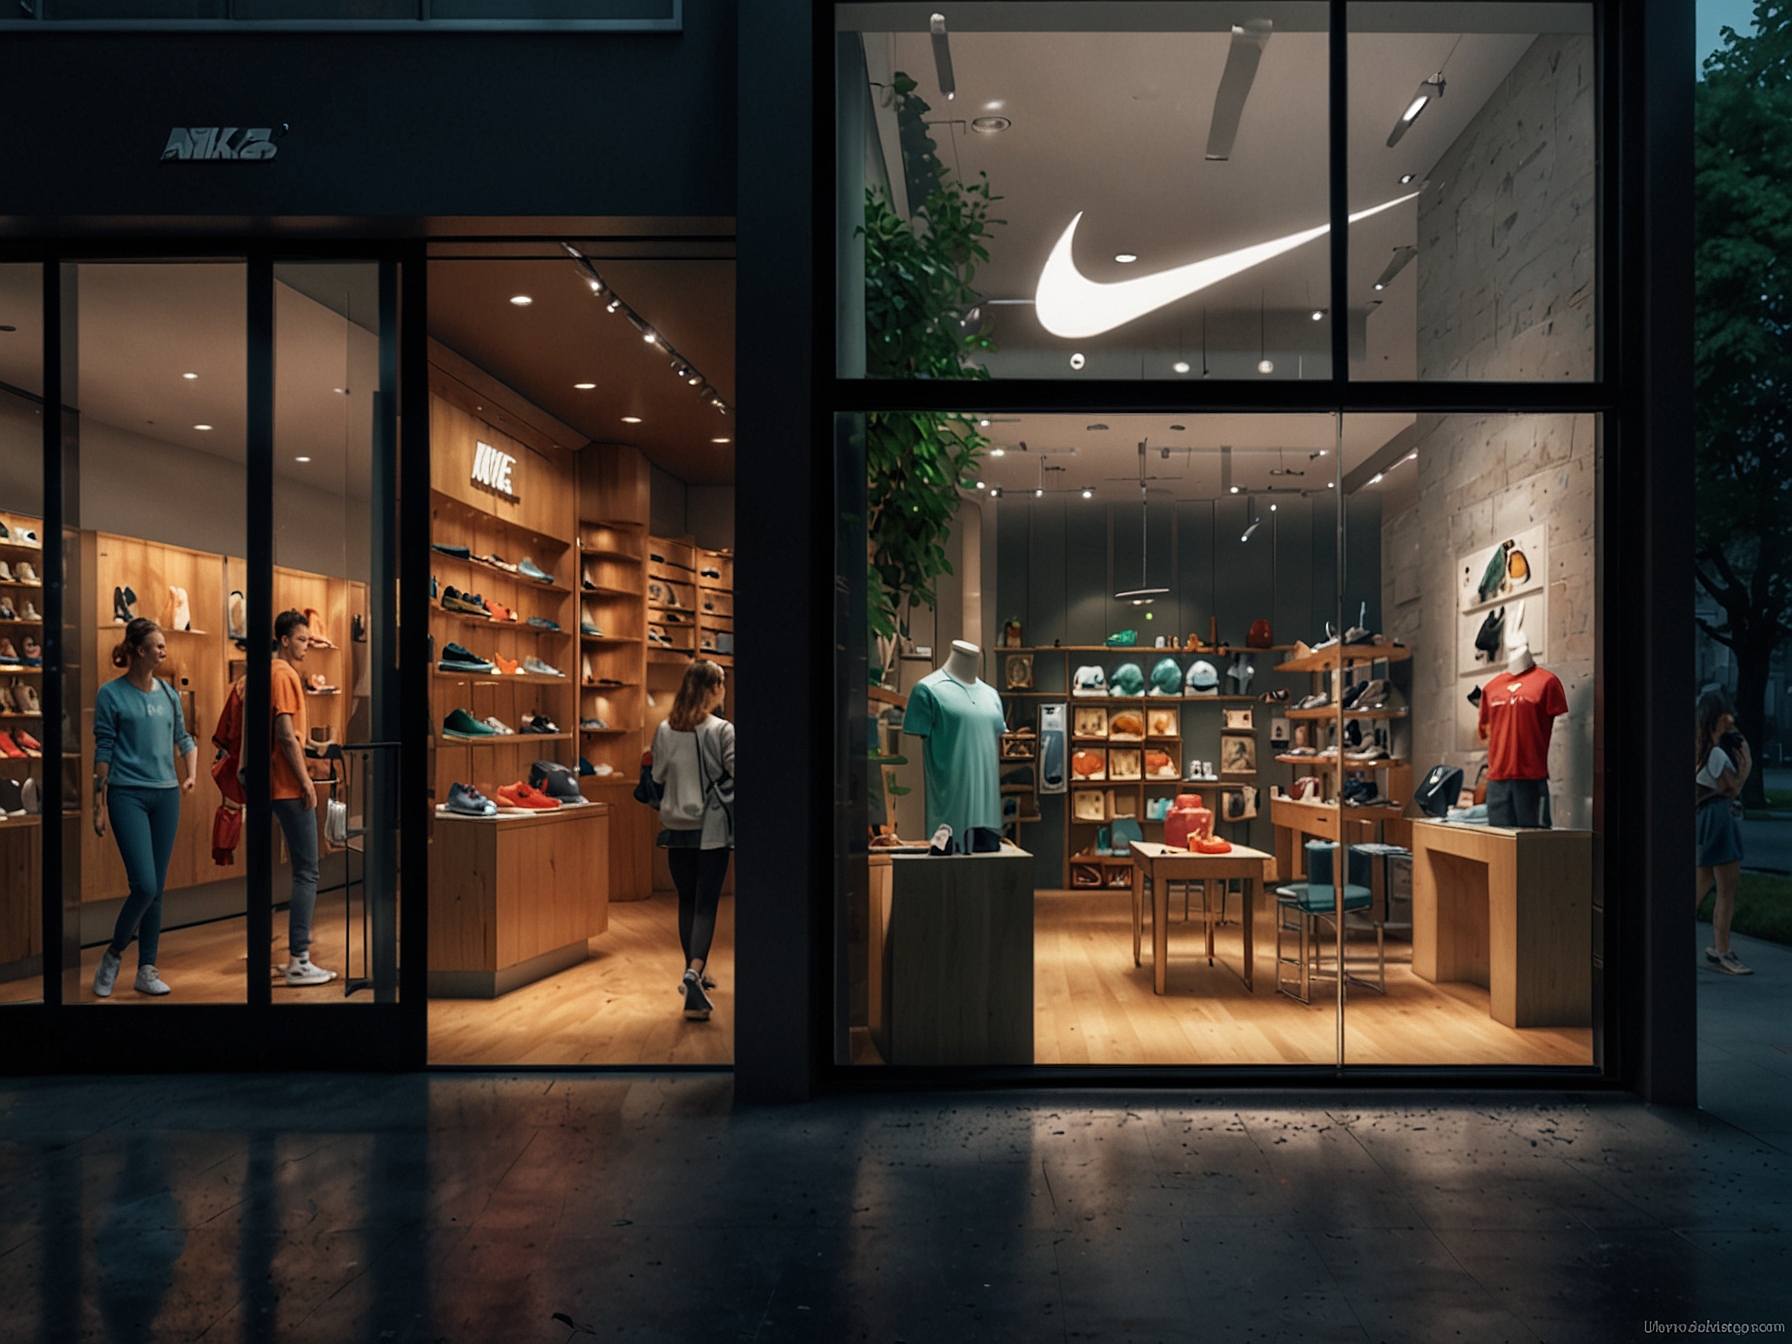 An illustration of a Nike store bustling with customers, showcasing various products, to depict consumer interest and spending trends in different regions, crucial for Nike's FQ4 evaluation.